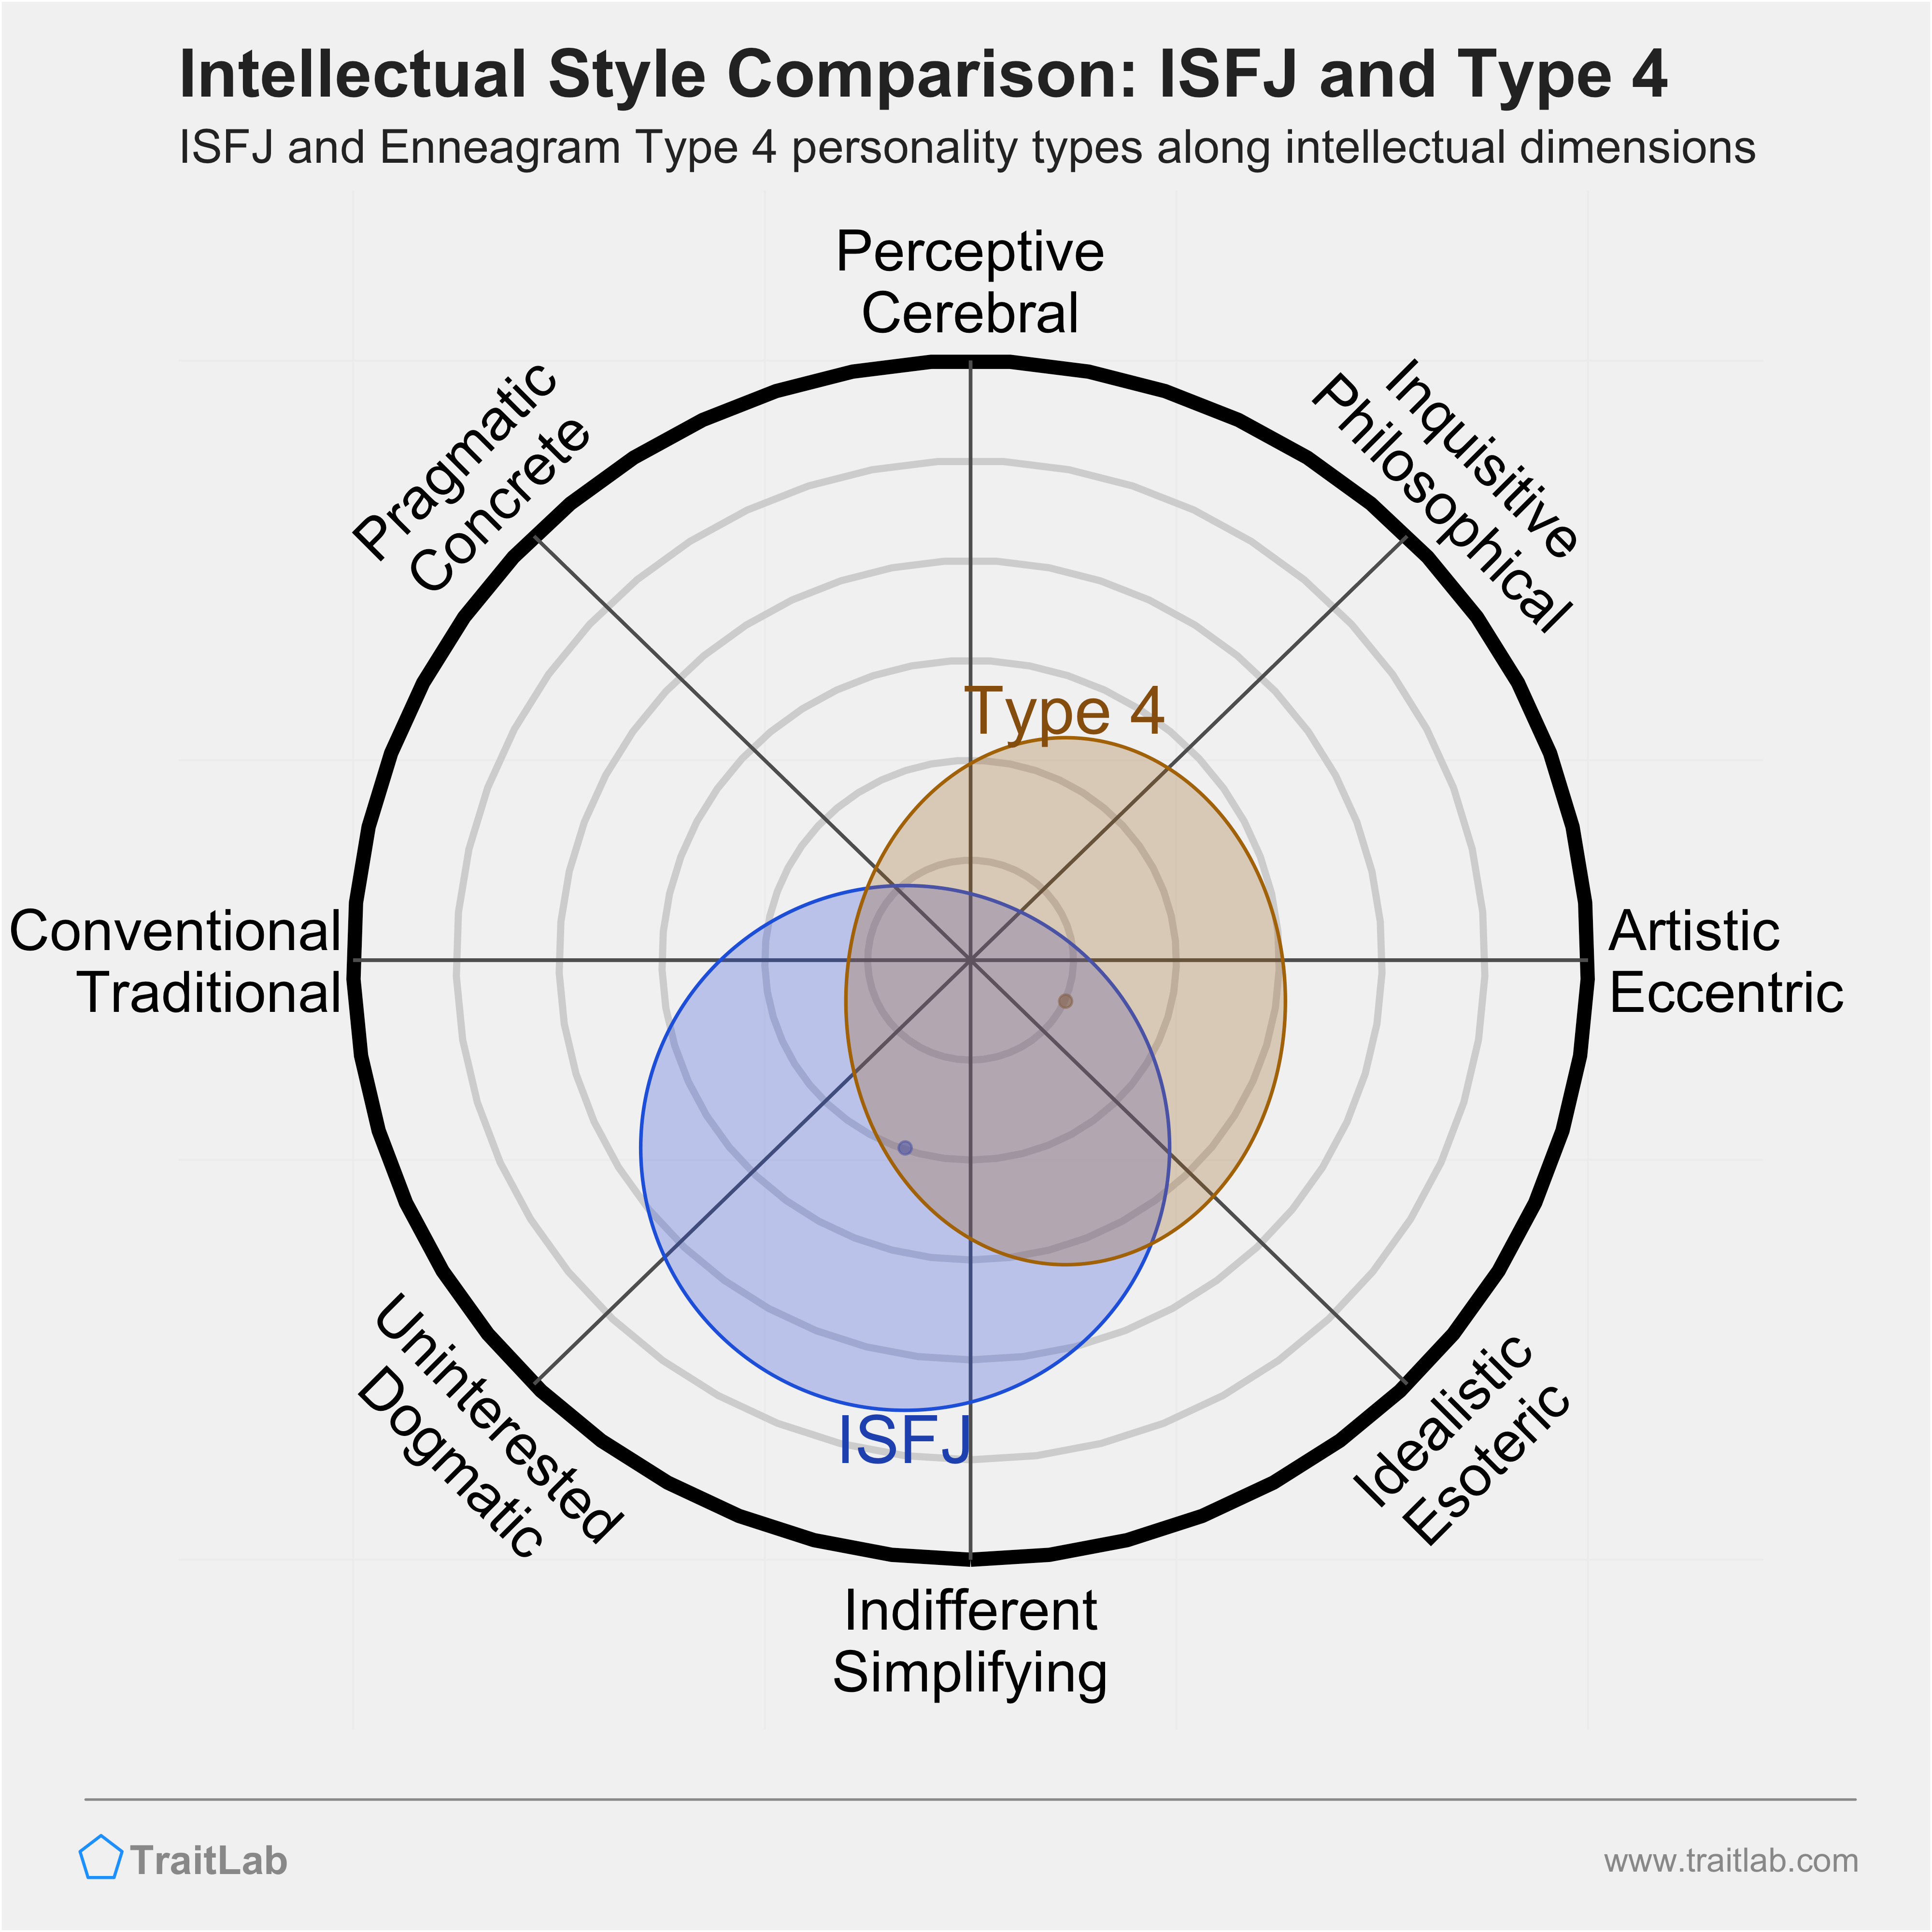 ISFJ and Type 4 comparison across intellectual dimensions